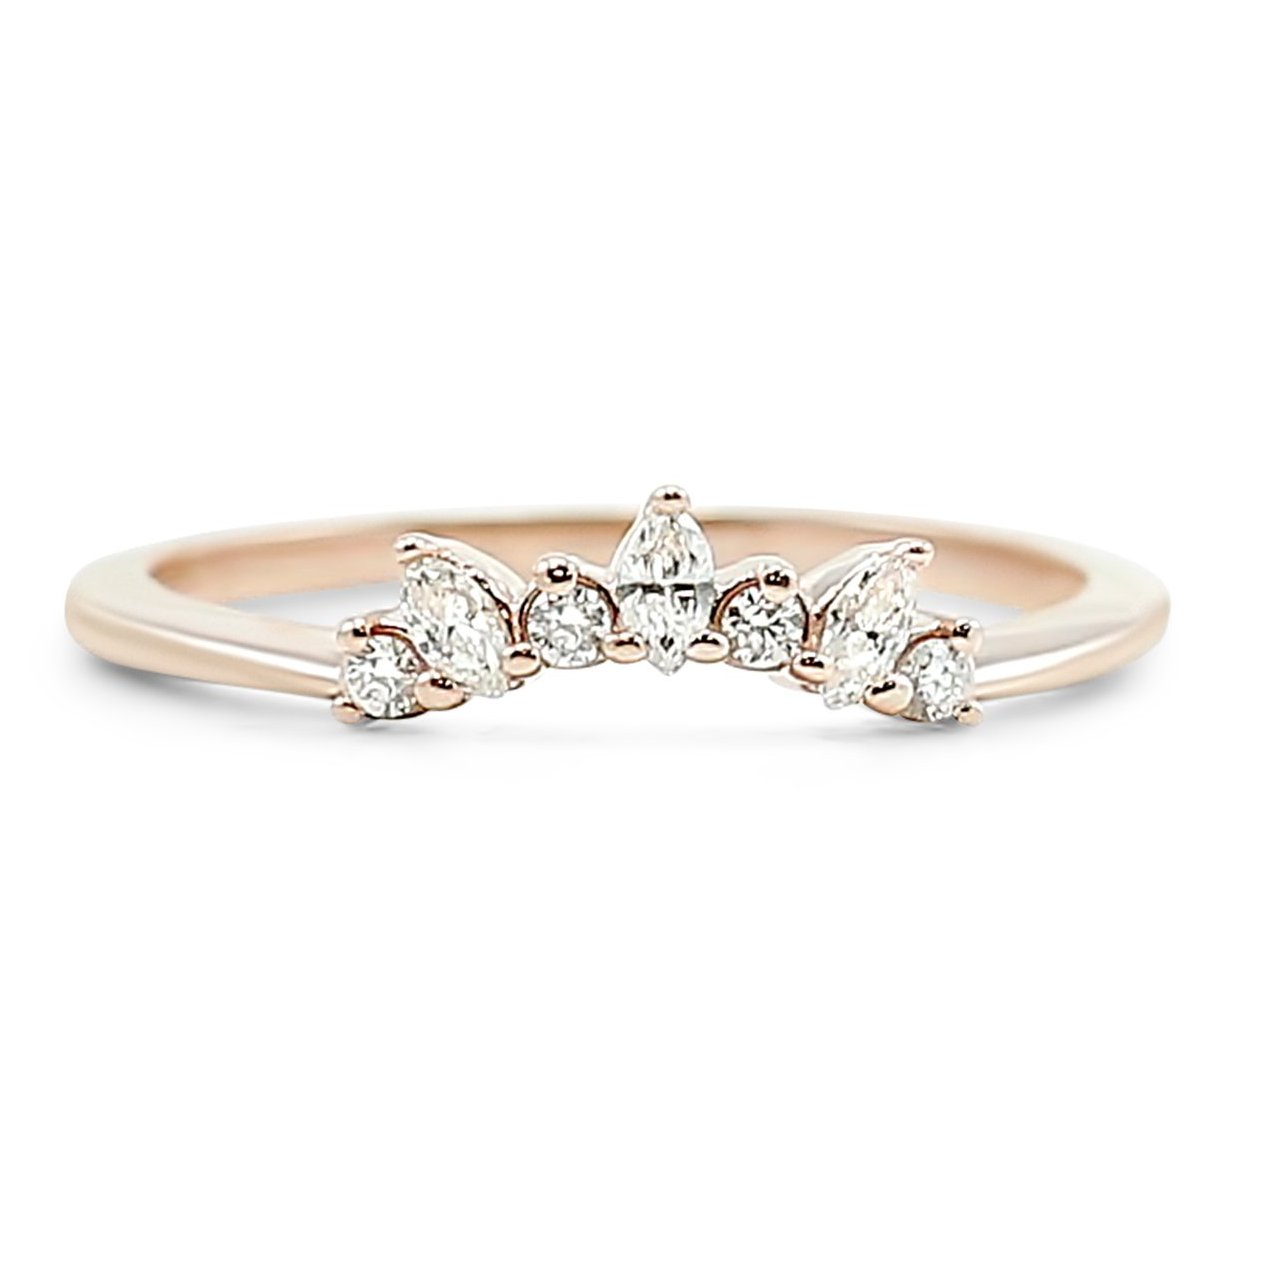 marquis and round diamond contour wedding band available in yellow rose and white gold